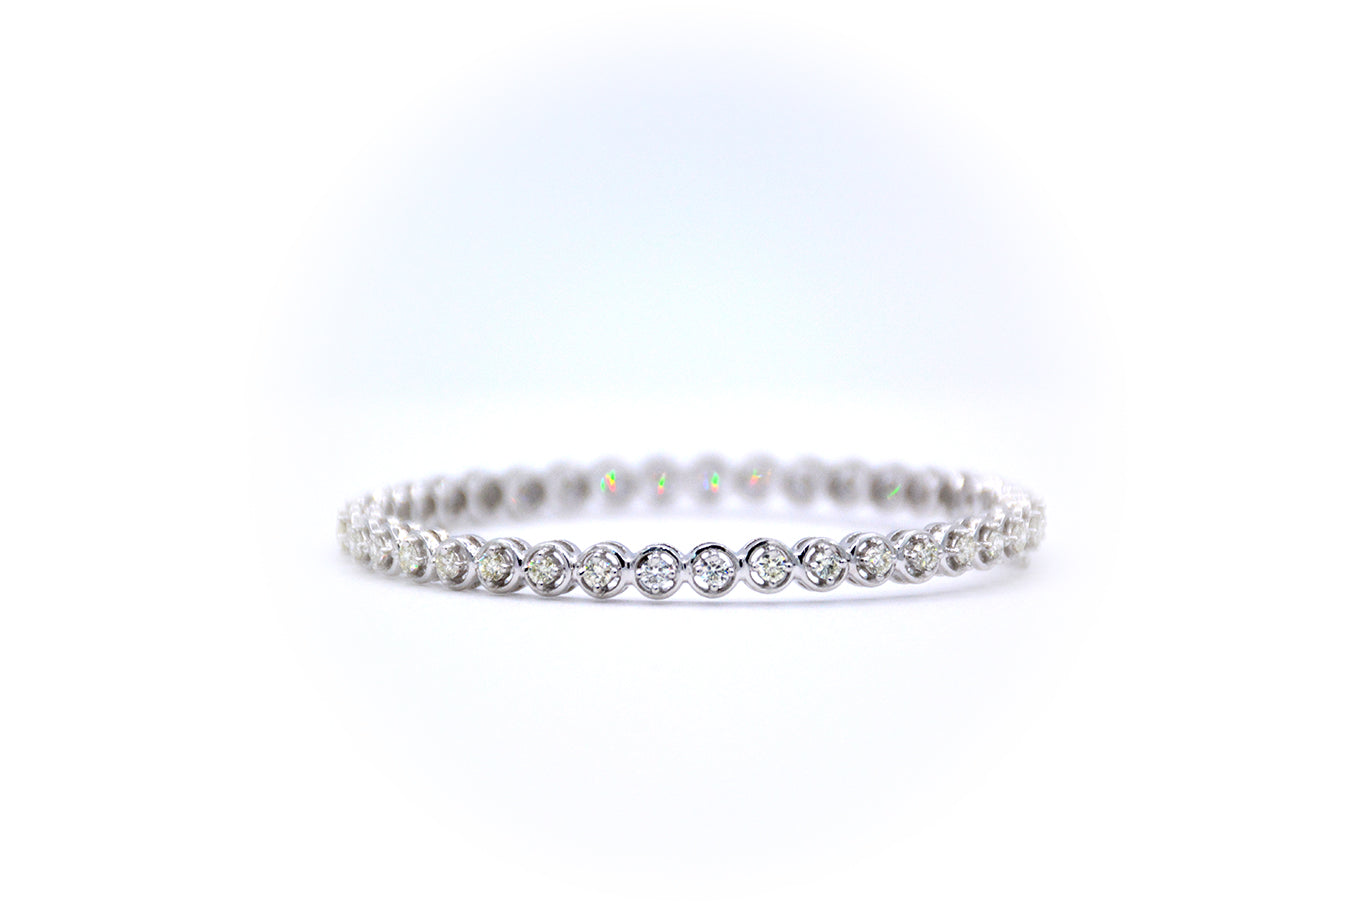 18K White gold oval bracelet with push clasp and 5.53ct T.W diamonds.